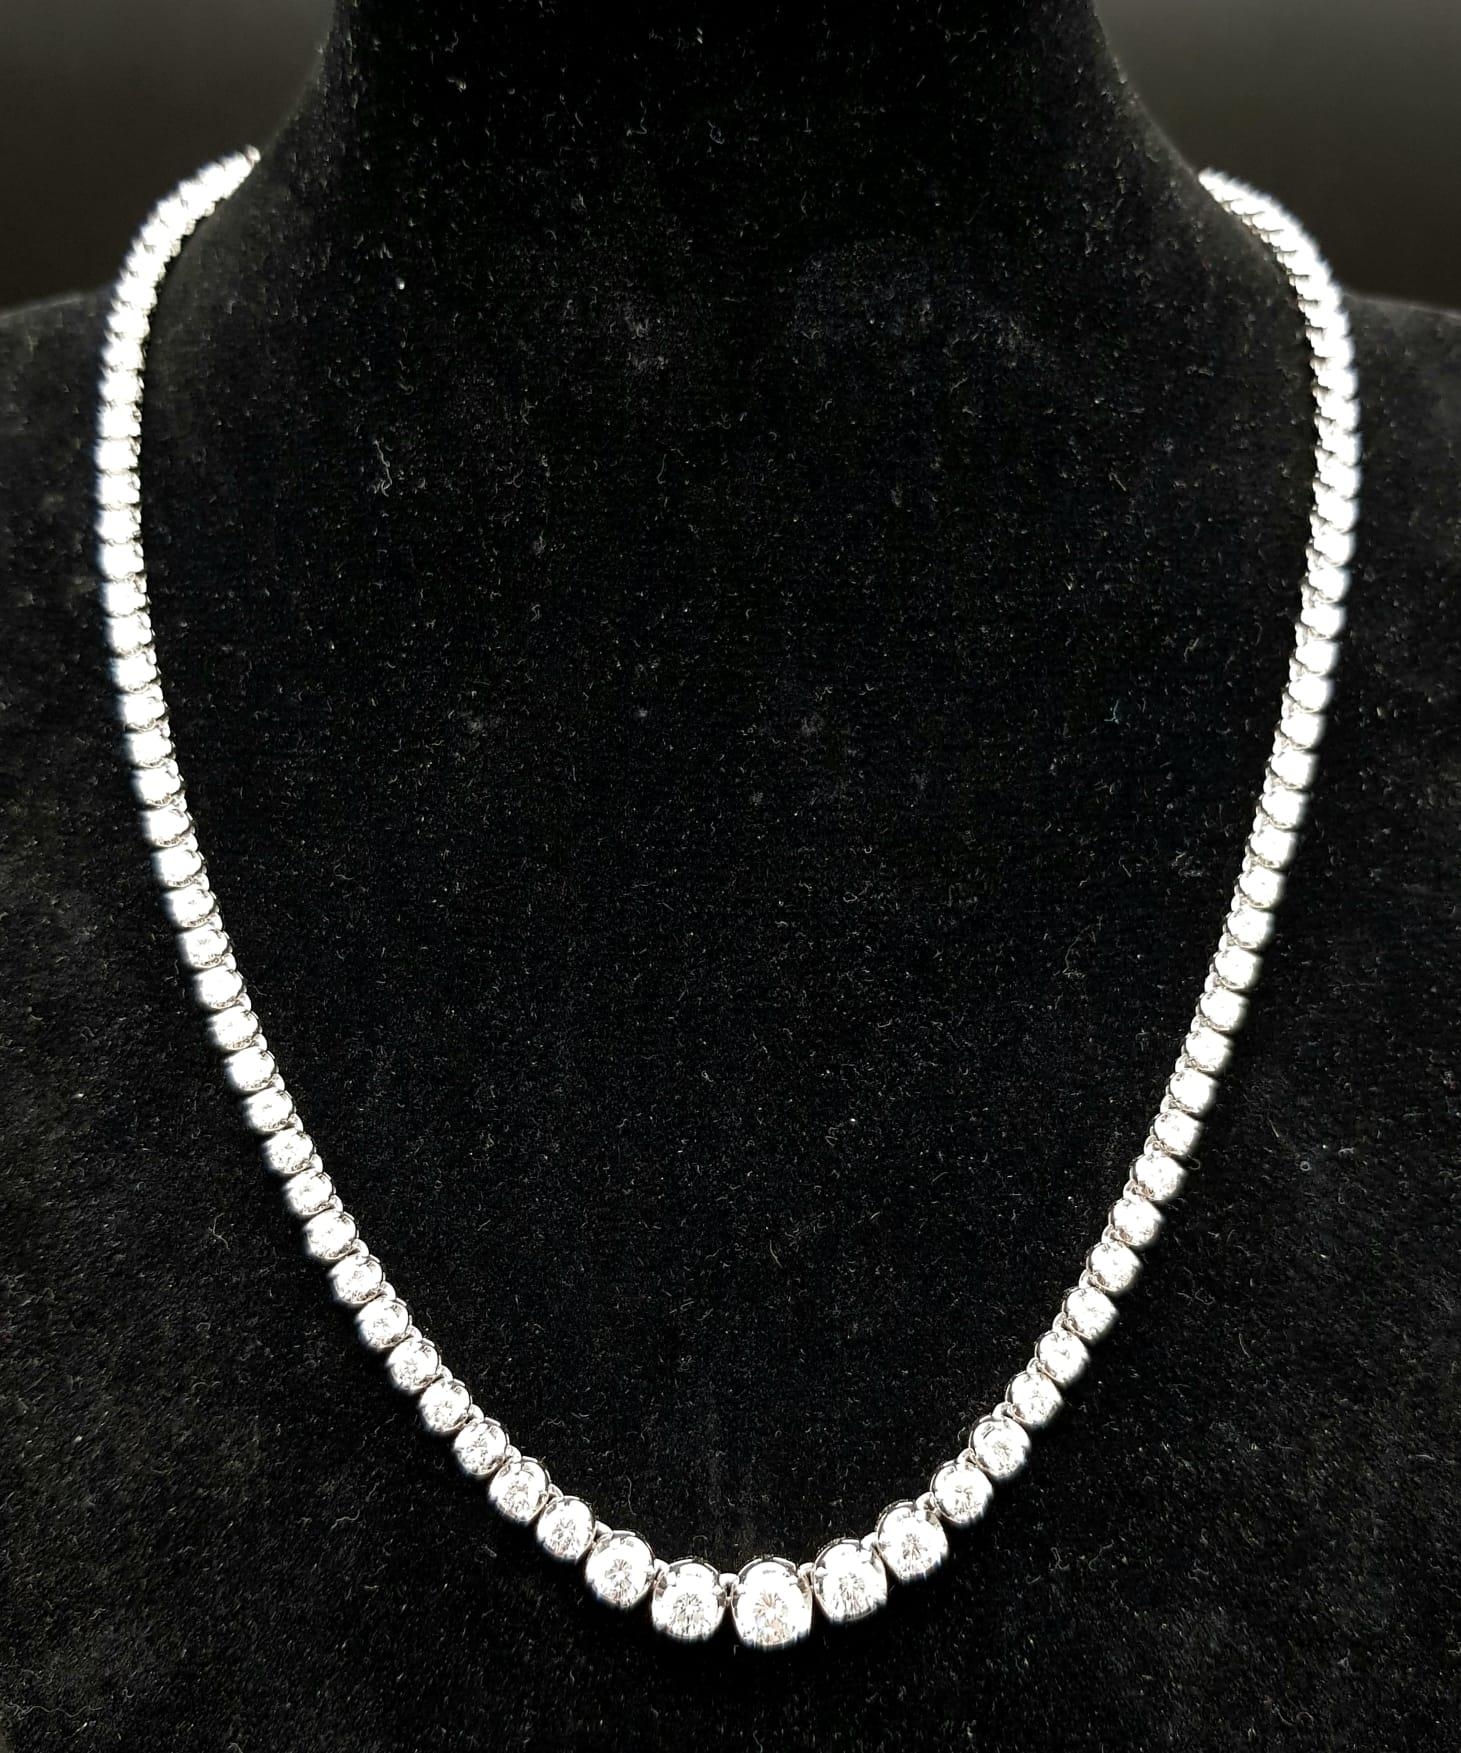 18k White Gold Necklace. 36.9g with 10ct Diamonds, absolutely stunning piece of jewellery.